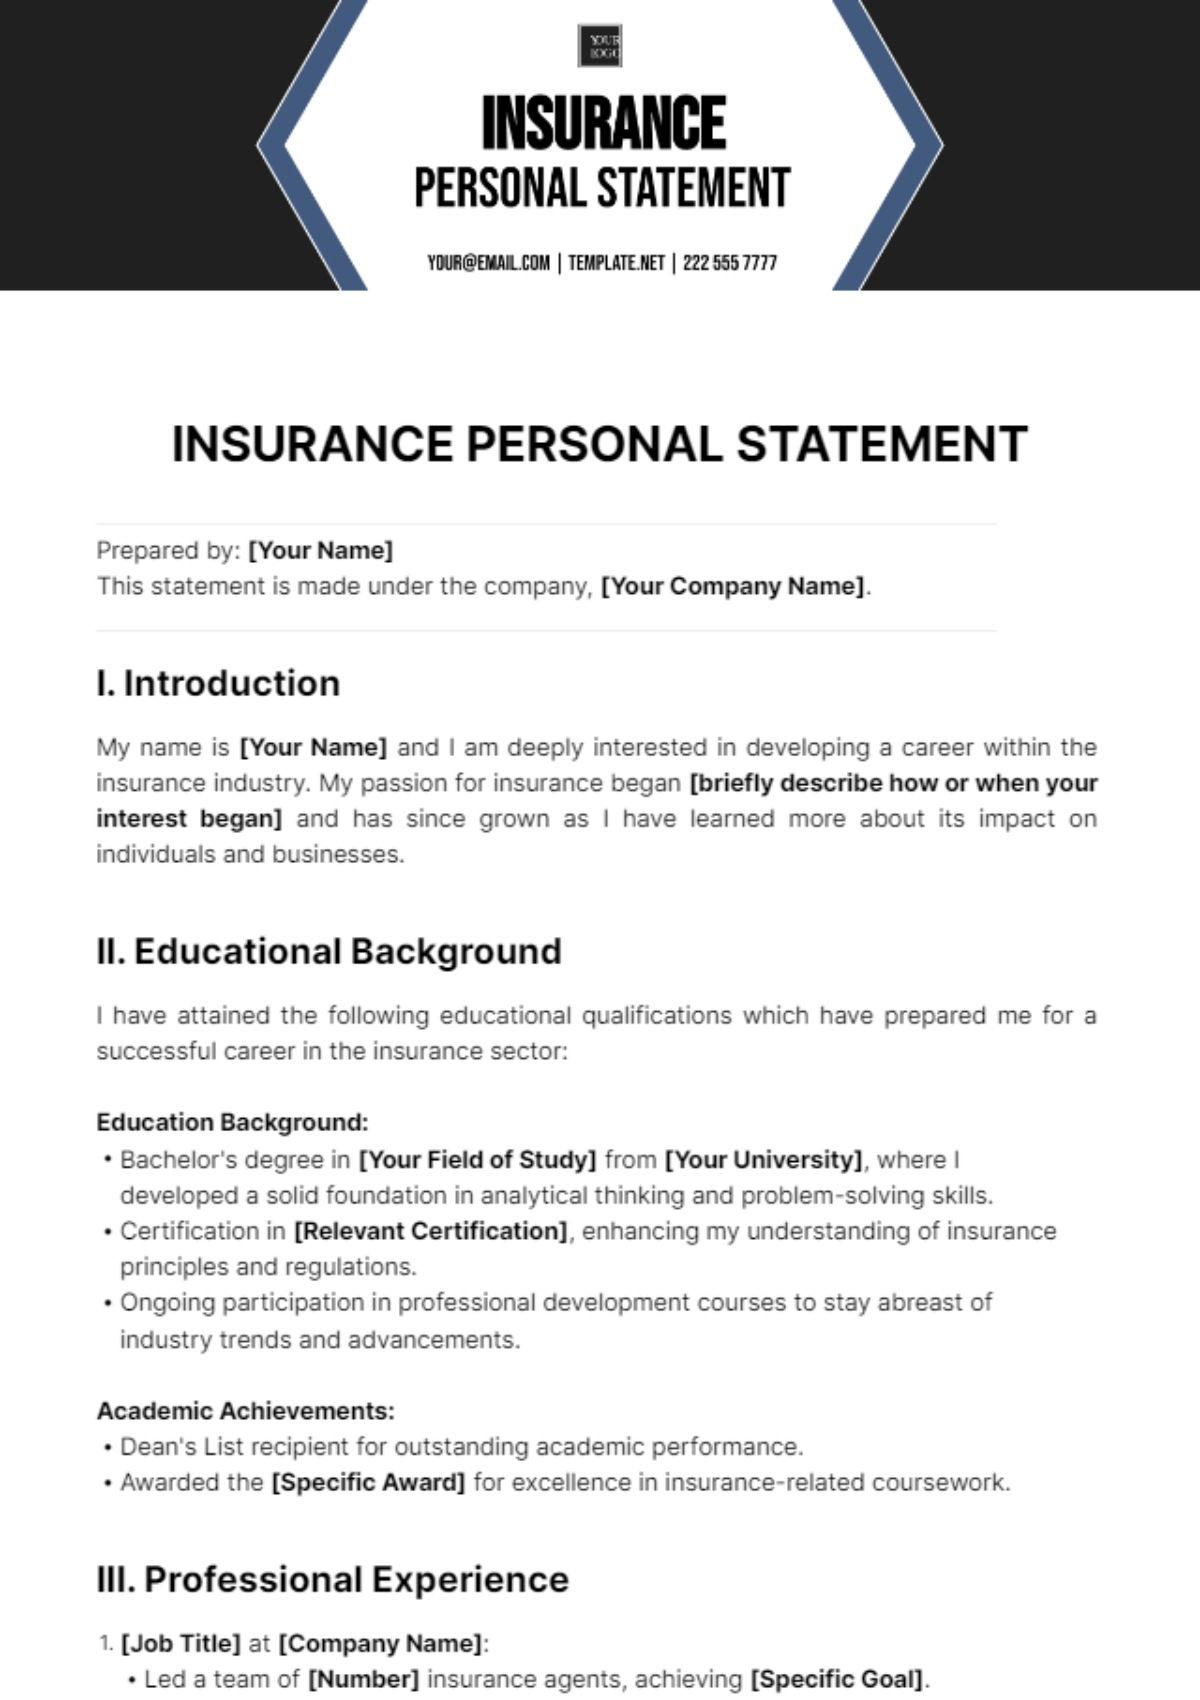 Insurance Personal Statement Template